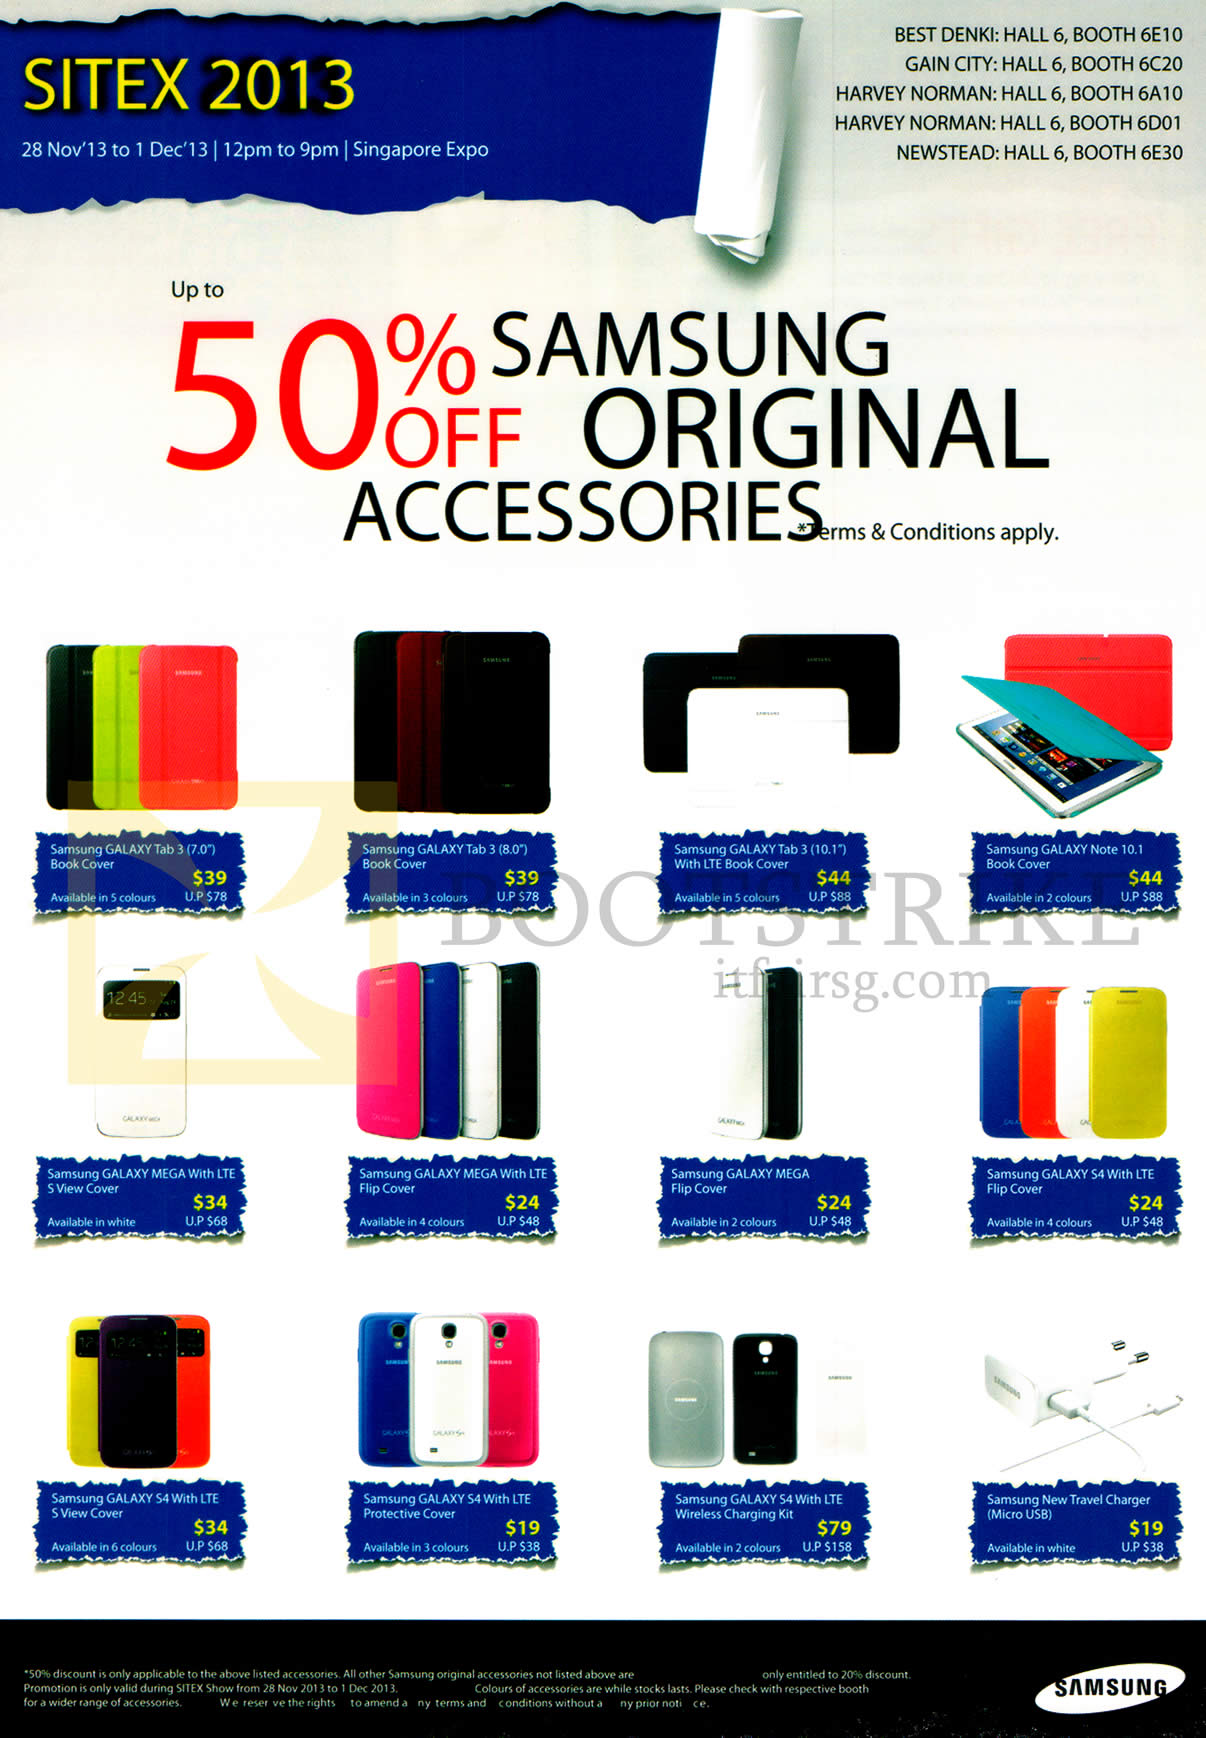 SITEX 2013 price list image brochure of Samsung Accessories Galaxy Cover, Case, Flip Cover, View Cover, Protective Cover, Charging Kit, Charger